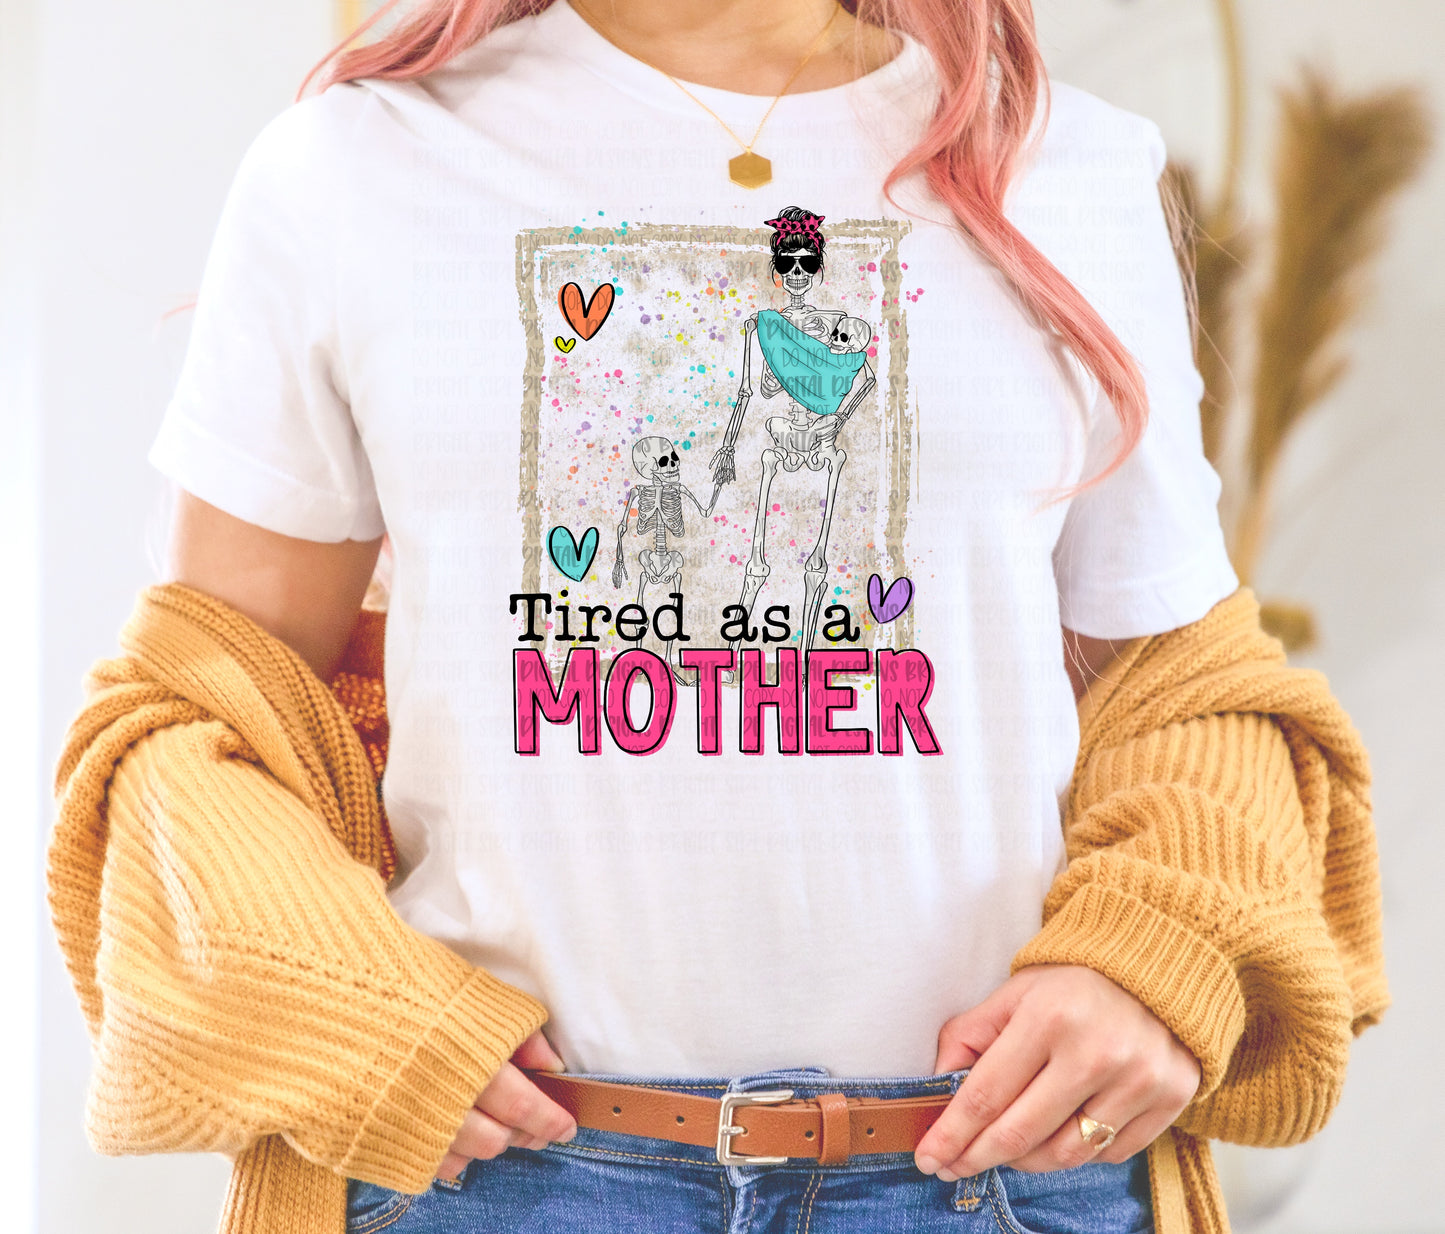 Tired as a mother -Gender neutral baby